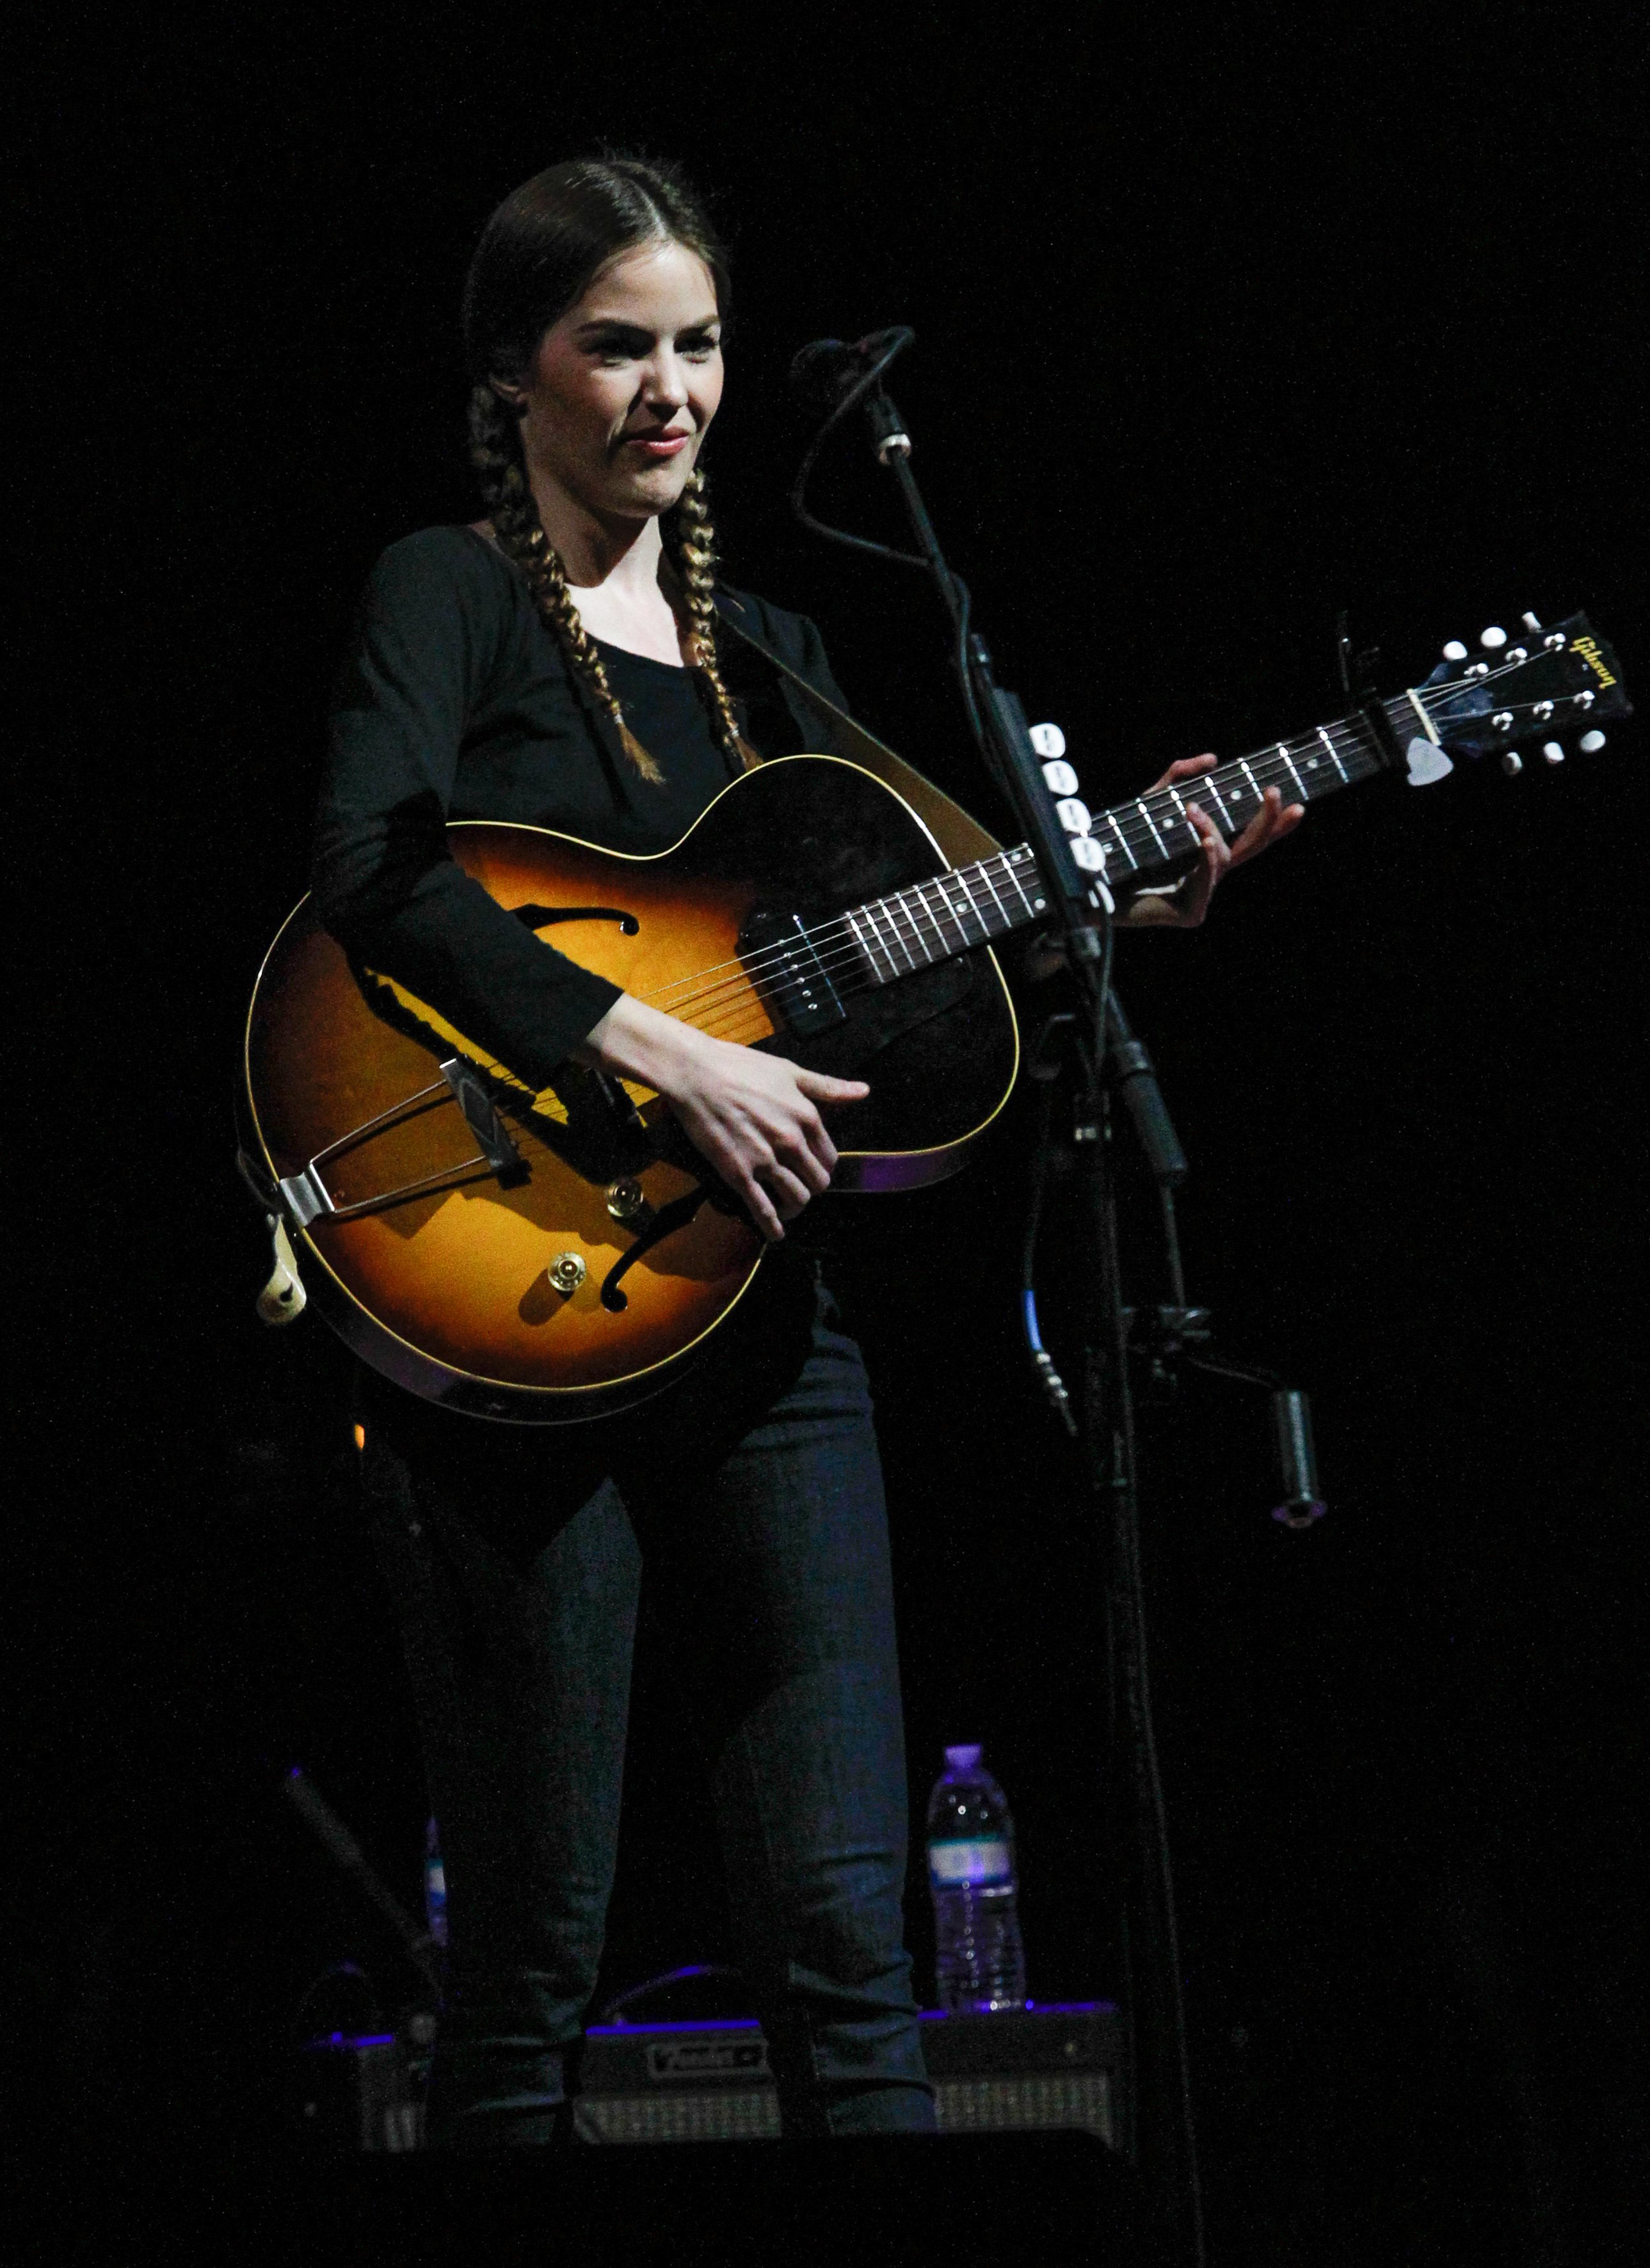 Lily Costner, daughter of actor Kevin Costner performs at War Memorial Auditorium on April 26, 2014, in Nashville, Tennessee. | Source: Getty Images